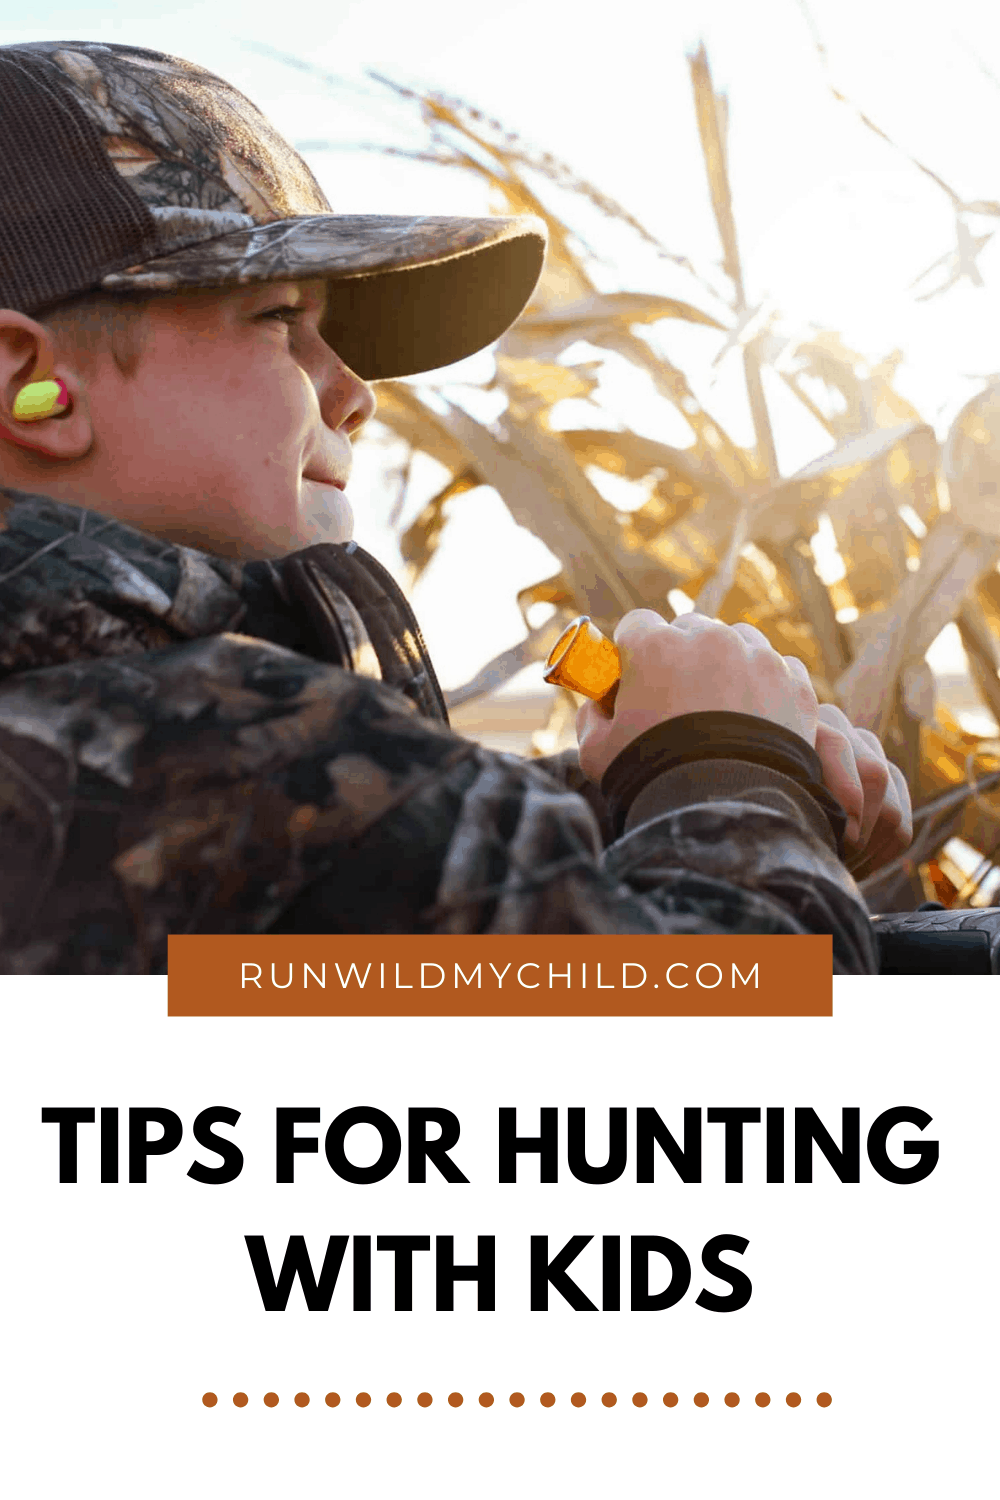 Tips for how to get started hunting with kids